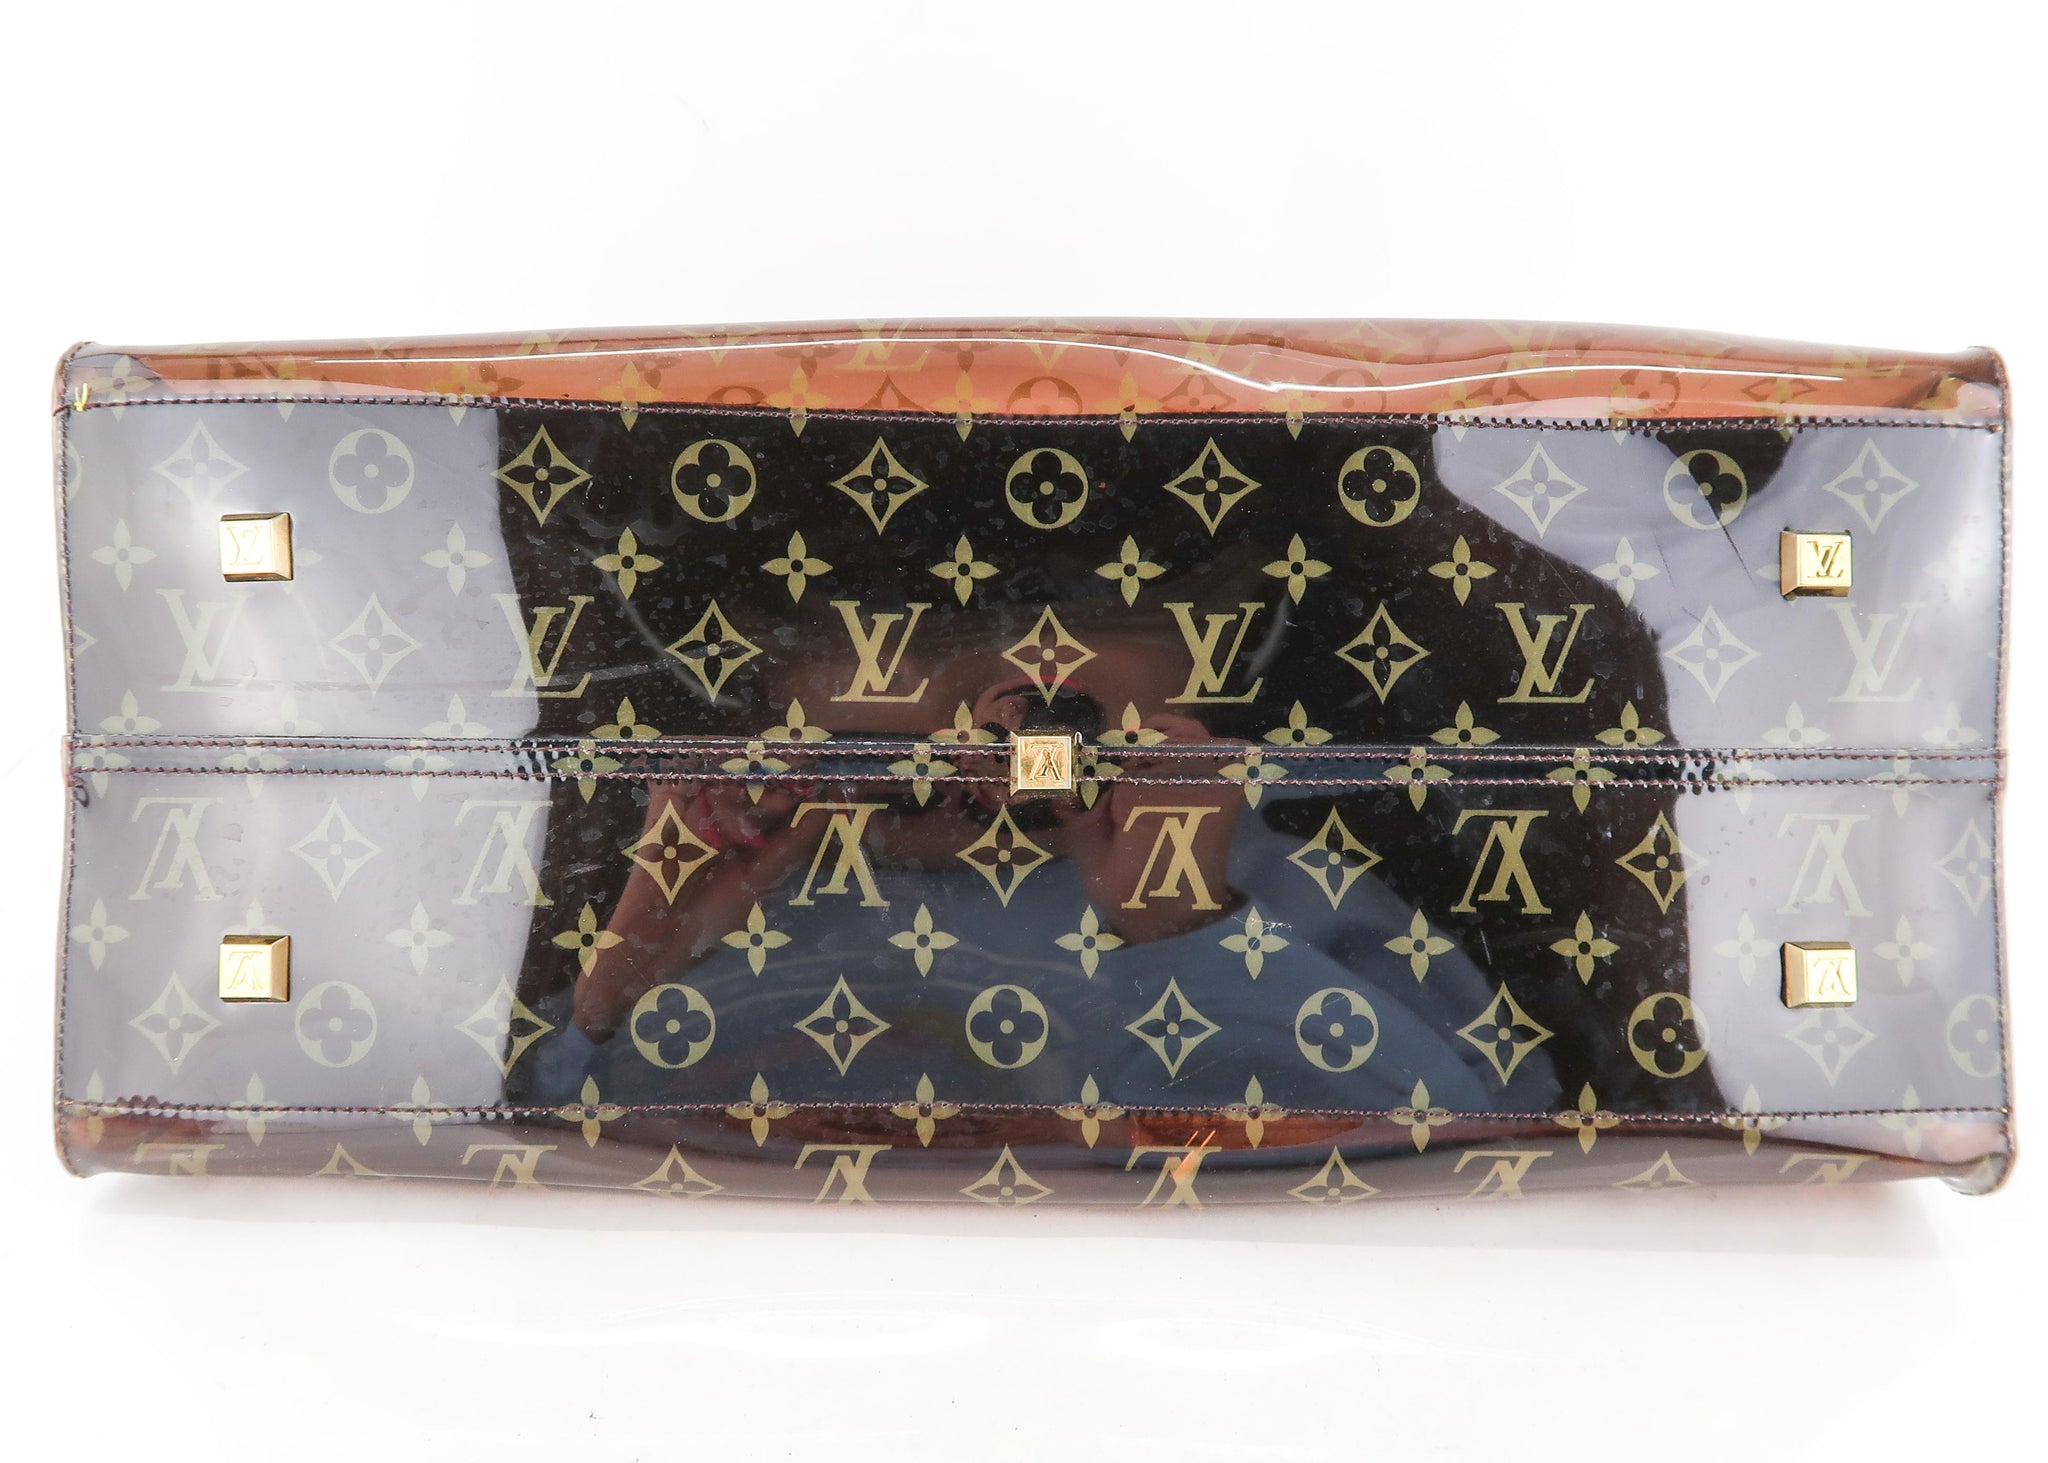 Cabas Cruise Louis Vuitton - 4 For Sale on 1stDibs